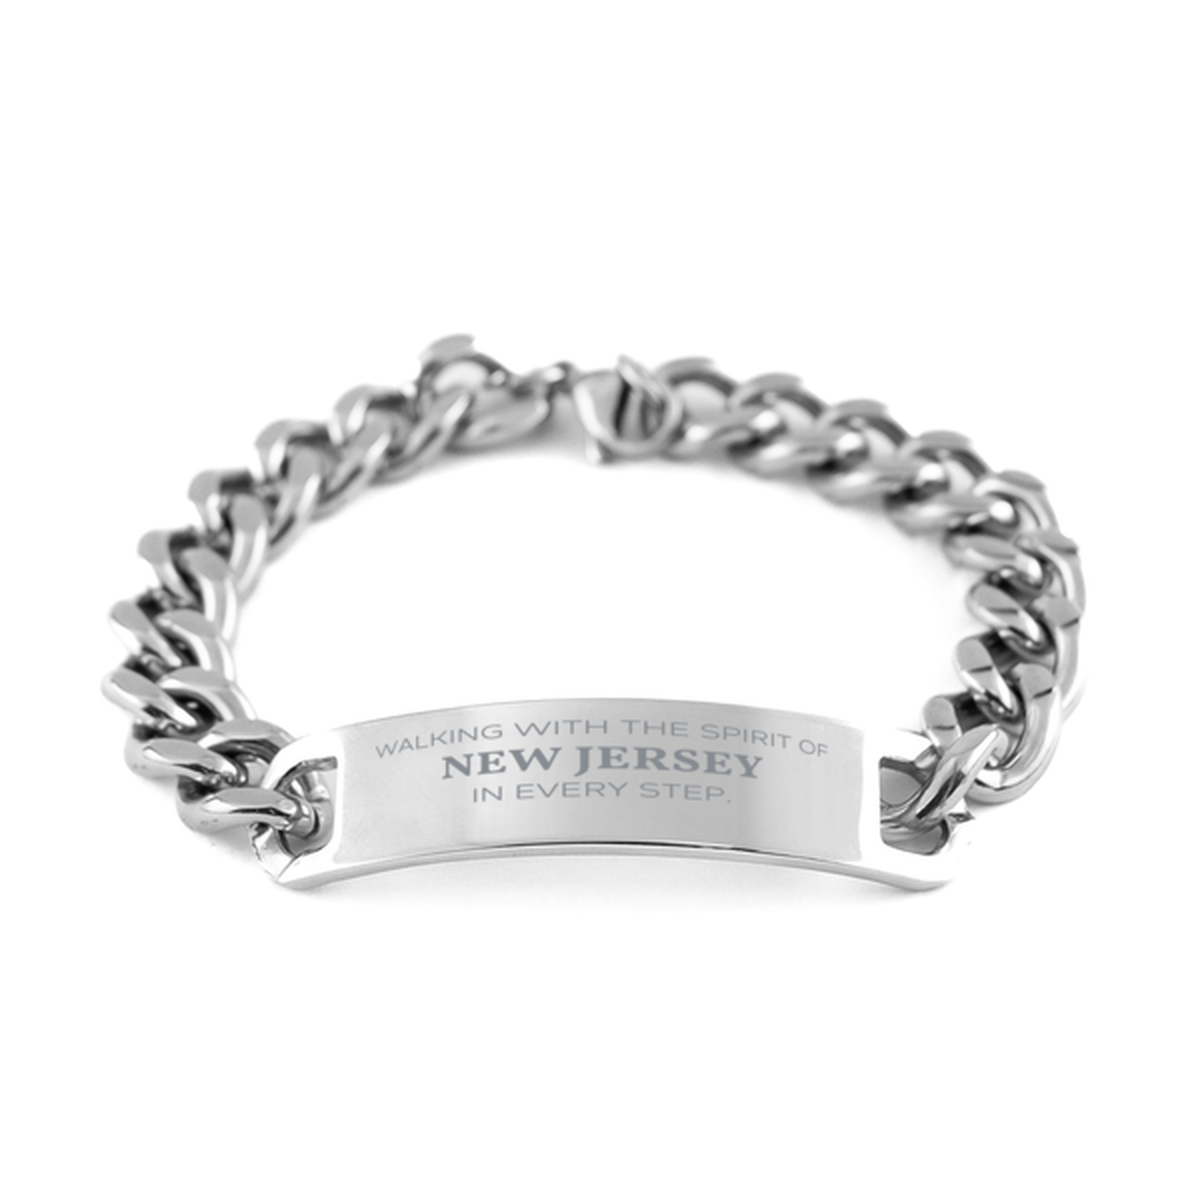 New Jersey Gifts, Walking with the spirit, Love New Jersey Birthday Christmas Cuban Chain Stainless Steel Bracelet For New Jersey People, Men, Women, Friends